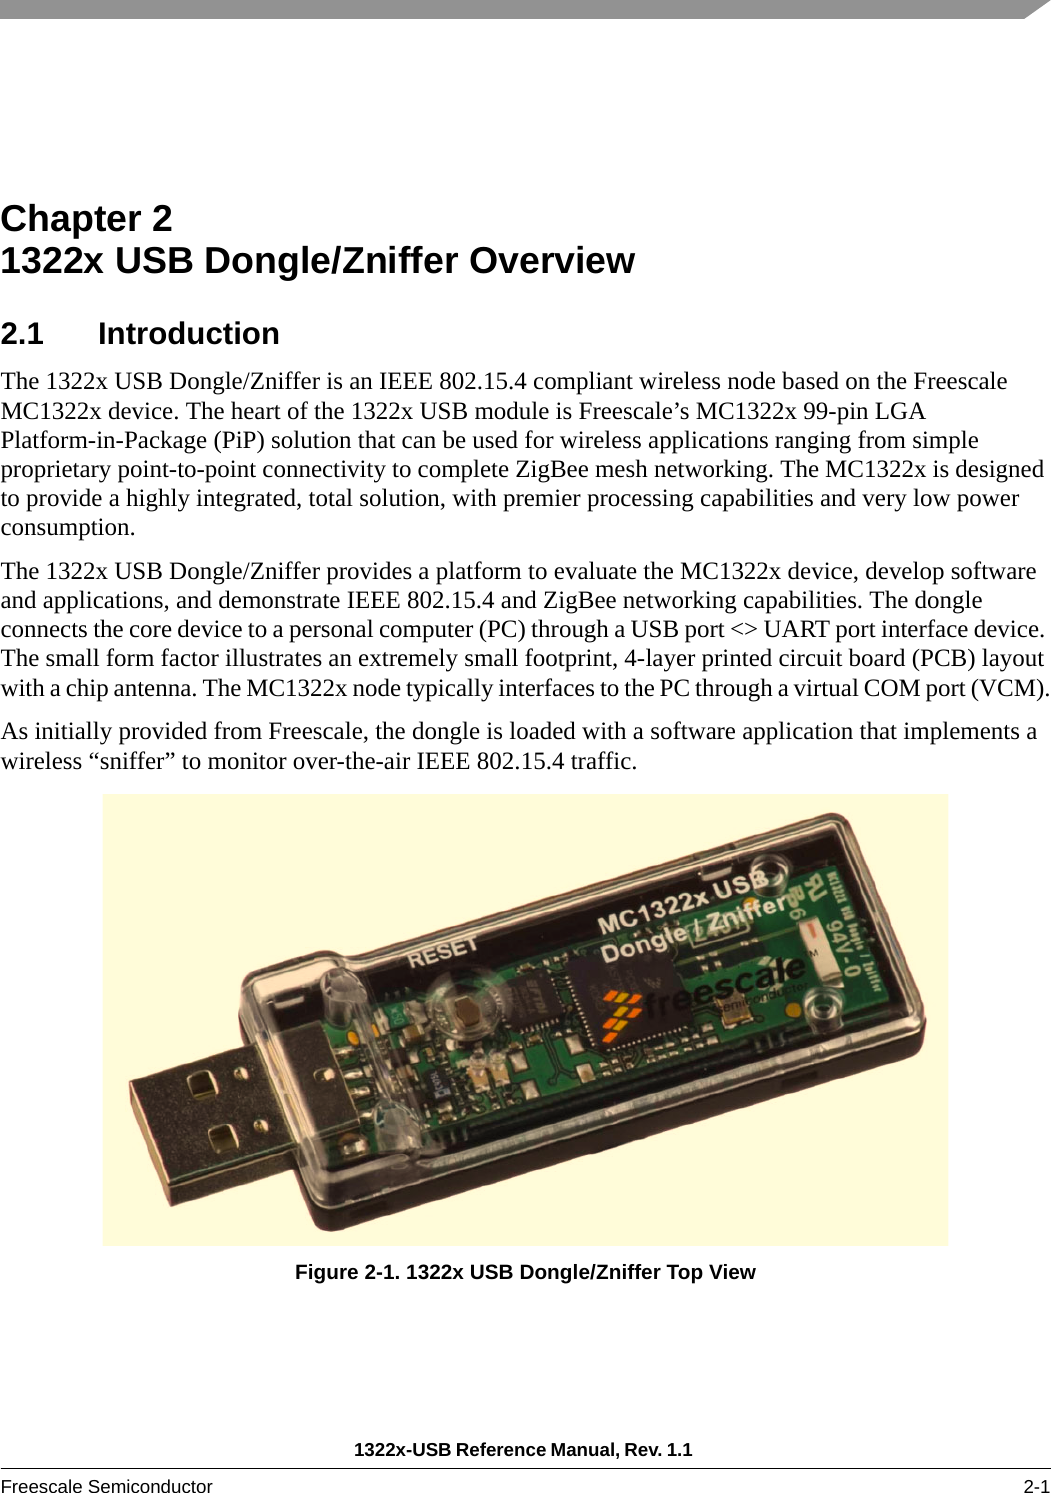 1322x-USB Reference Manual, Rev. 1.1 Freescale Semiconductor 2-1Chapter 2  1322x USB Dongle/Zniffer Overview2.1 IntroductionThe 1322x USB Dongle/Zniffer is an IEEE 802.15.4 compliant wireless node based on the Freescale MC1322x device. The heart of the 1322x USB module is Freescale’s MC1322x 99-pin LGA Platform-in-Package (PiP) solution that can be used for wireless applications ranging from simple proprietary point-to-point connectivity to complete ZigBee mesh networking. The MC1322x is designed to provide a highly integrated, total solution, with premier processing capabilities and very low power consumption.The 1322x USB Dongle/Zniffer provides a platform to evaluate the MC1322x device, develop software and applications, and demonstrate IEEE 802.15.4 and ZigBee networking capabilities. The dongle connects the core device to a personal computer (PC) through a USB port &lt;&gt; UART port interface device. The small form factor illustrates an extremely small footprint, 4-layer printed circuit board (PCB) layout with a chip antenna. The MC1322x node typically interfaces to the PC through a virtual COM port (VCM).As initially provided from Freescale, the dongle is loaded with a software application that implements a wireless “sniffer” to monitor over-the-air IEEE 802.15.4 traffic.Figure 2-1. 1322x USB Dongle/Zniffer Top View